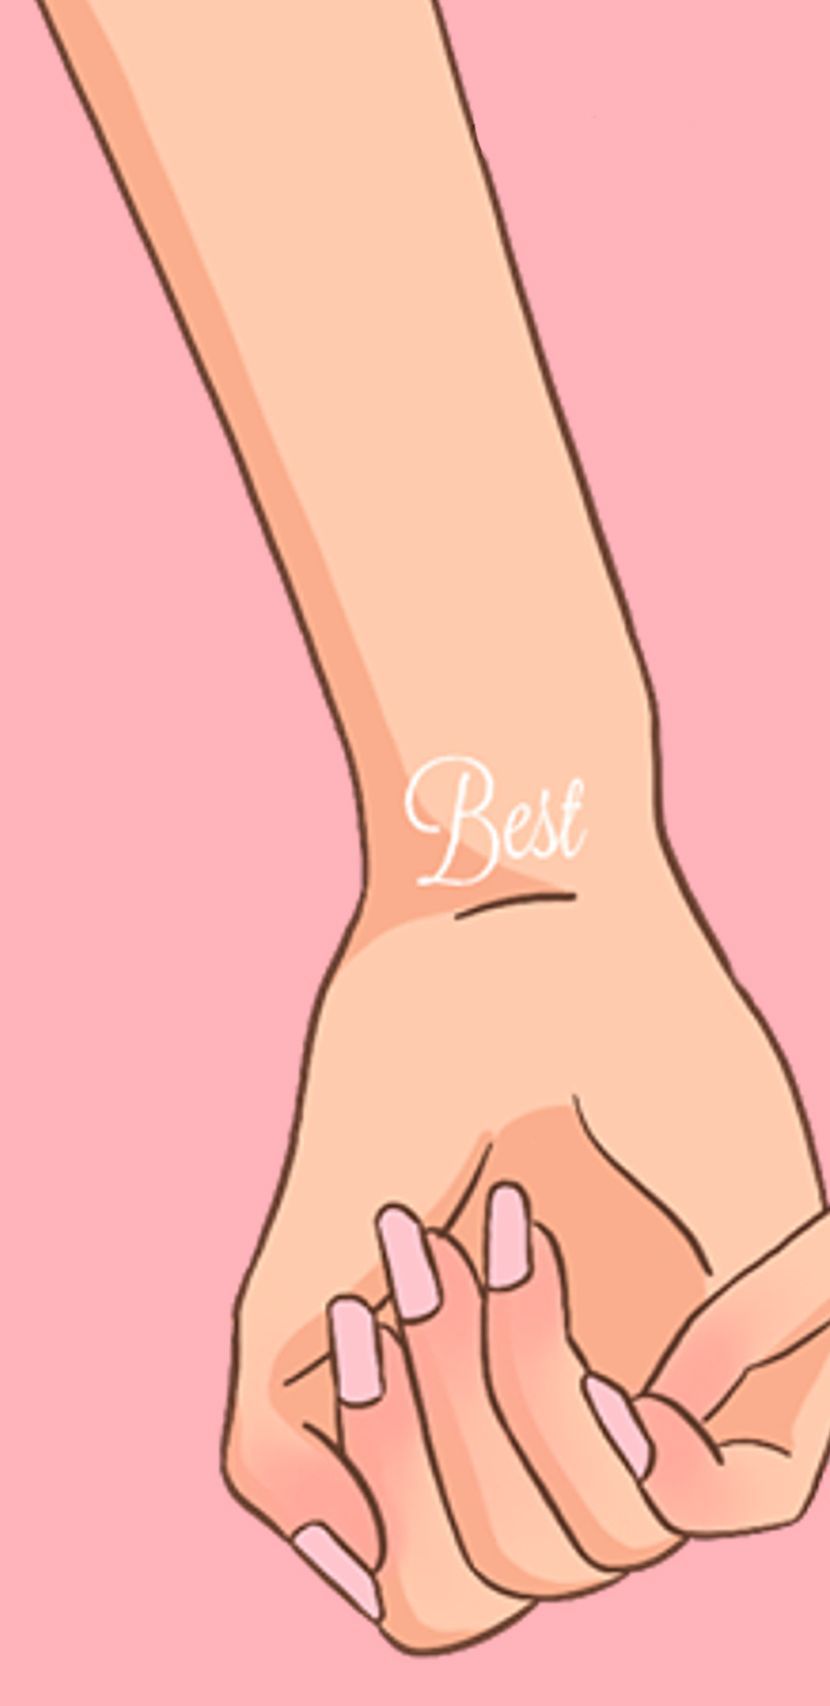 BFF Best Friend Wallpaper by AYT Technology  Android Apps  AppAgg